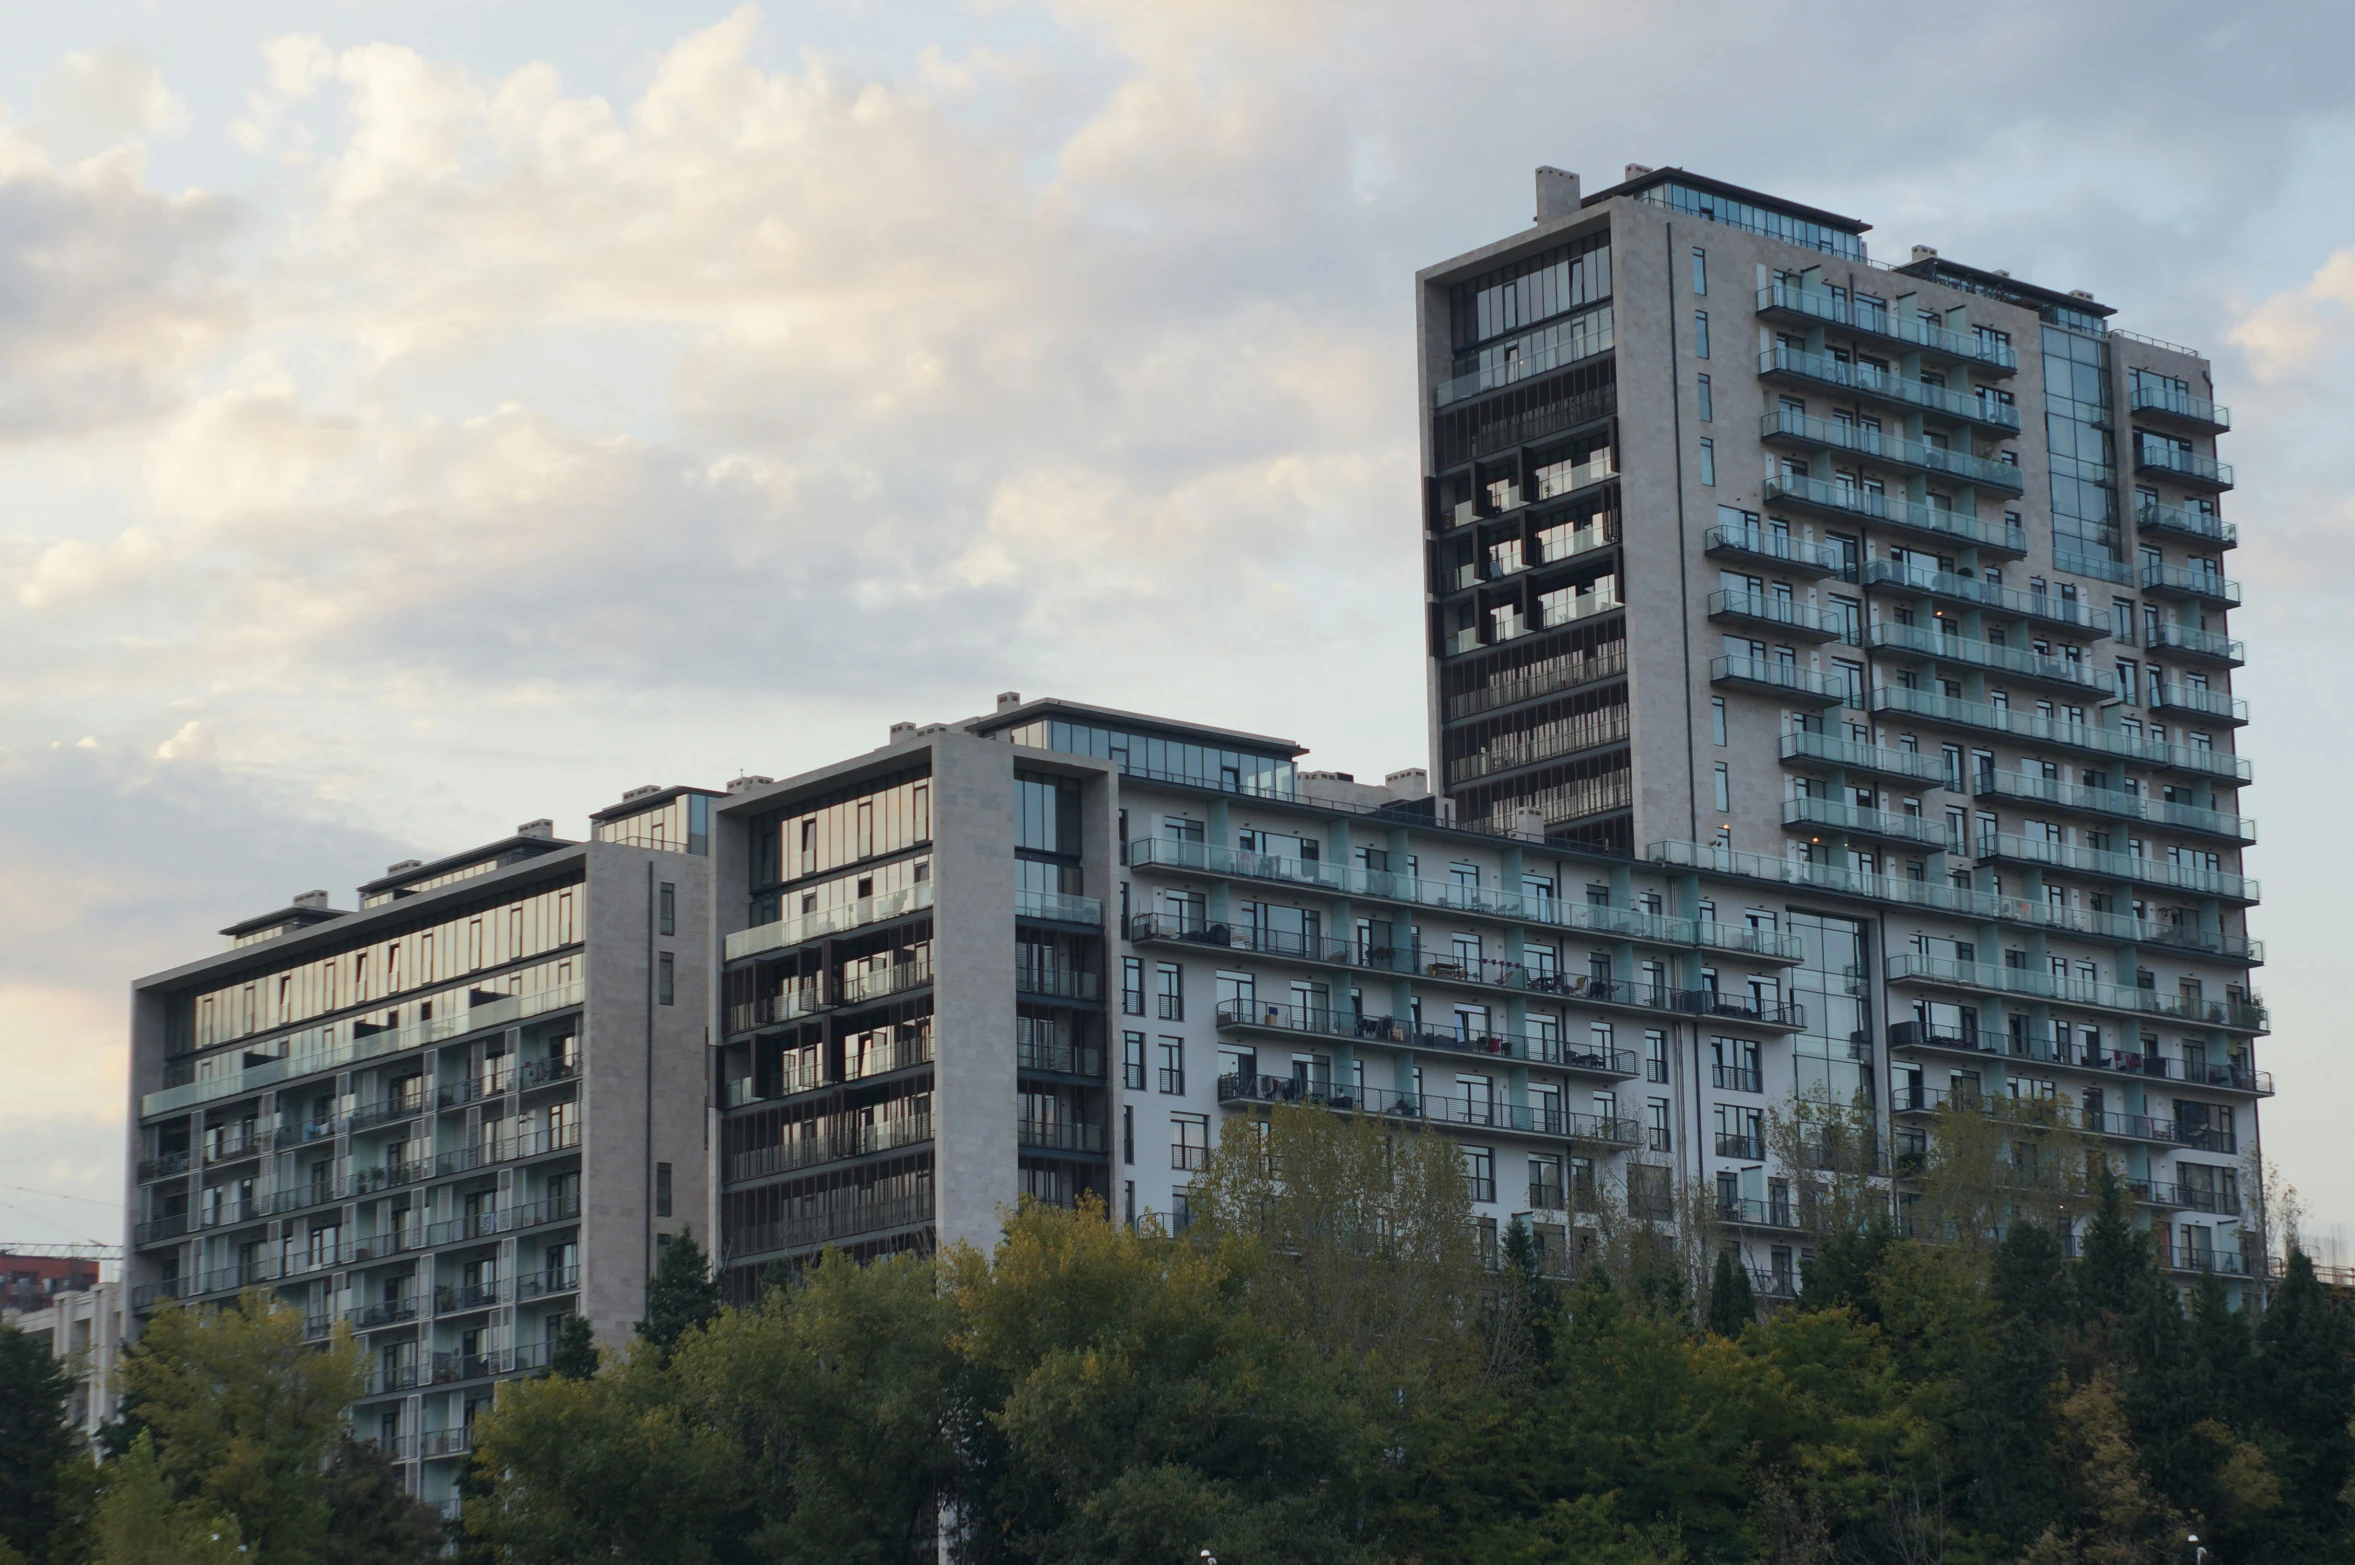 two high rise buildings with trees surrounding